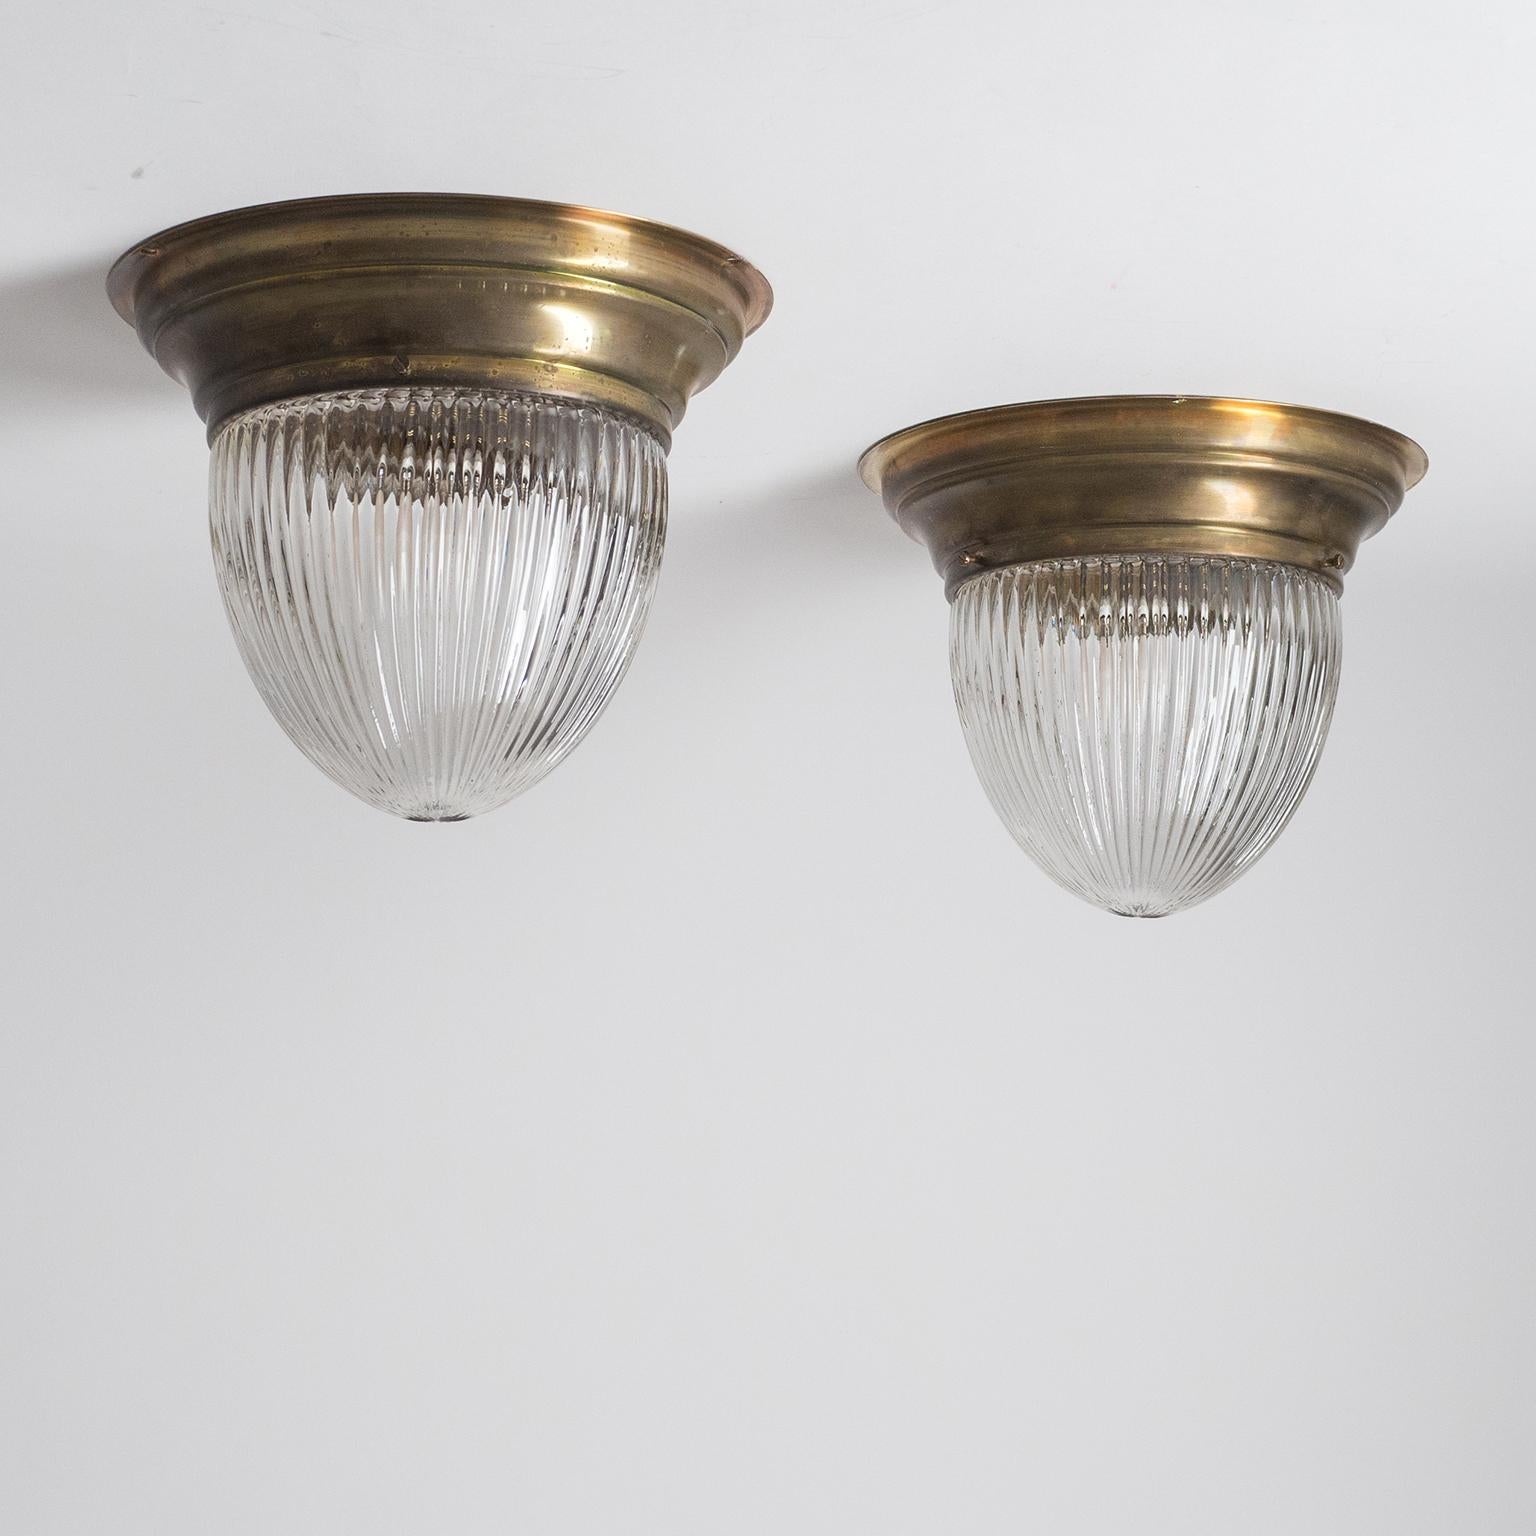 Pair of early 20th century Austrian ceiling or wall lights. Brass backplate with a holophane-style glass diffuser. One original brass and ceramic E27 socket with new wiring. Priced and sold as a pair.